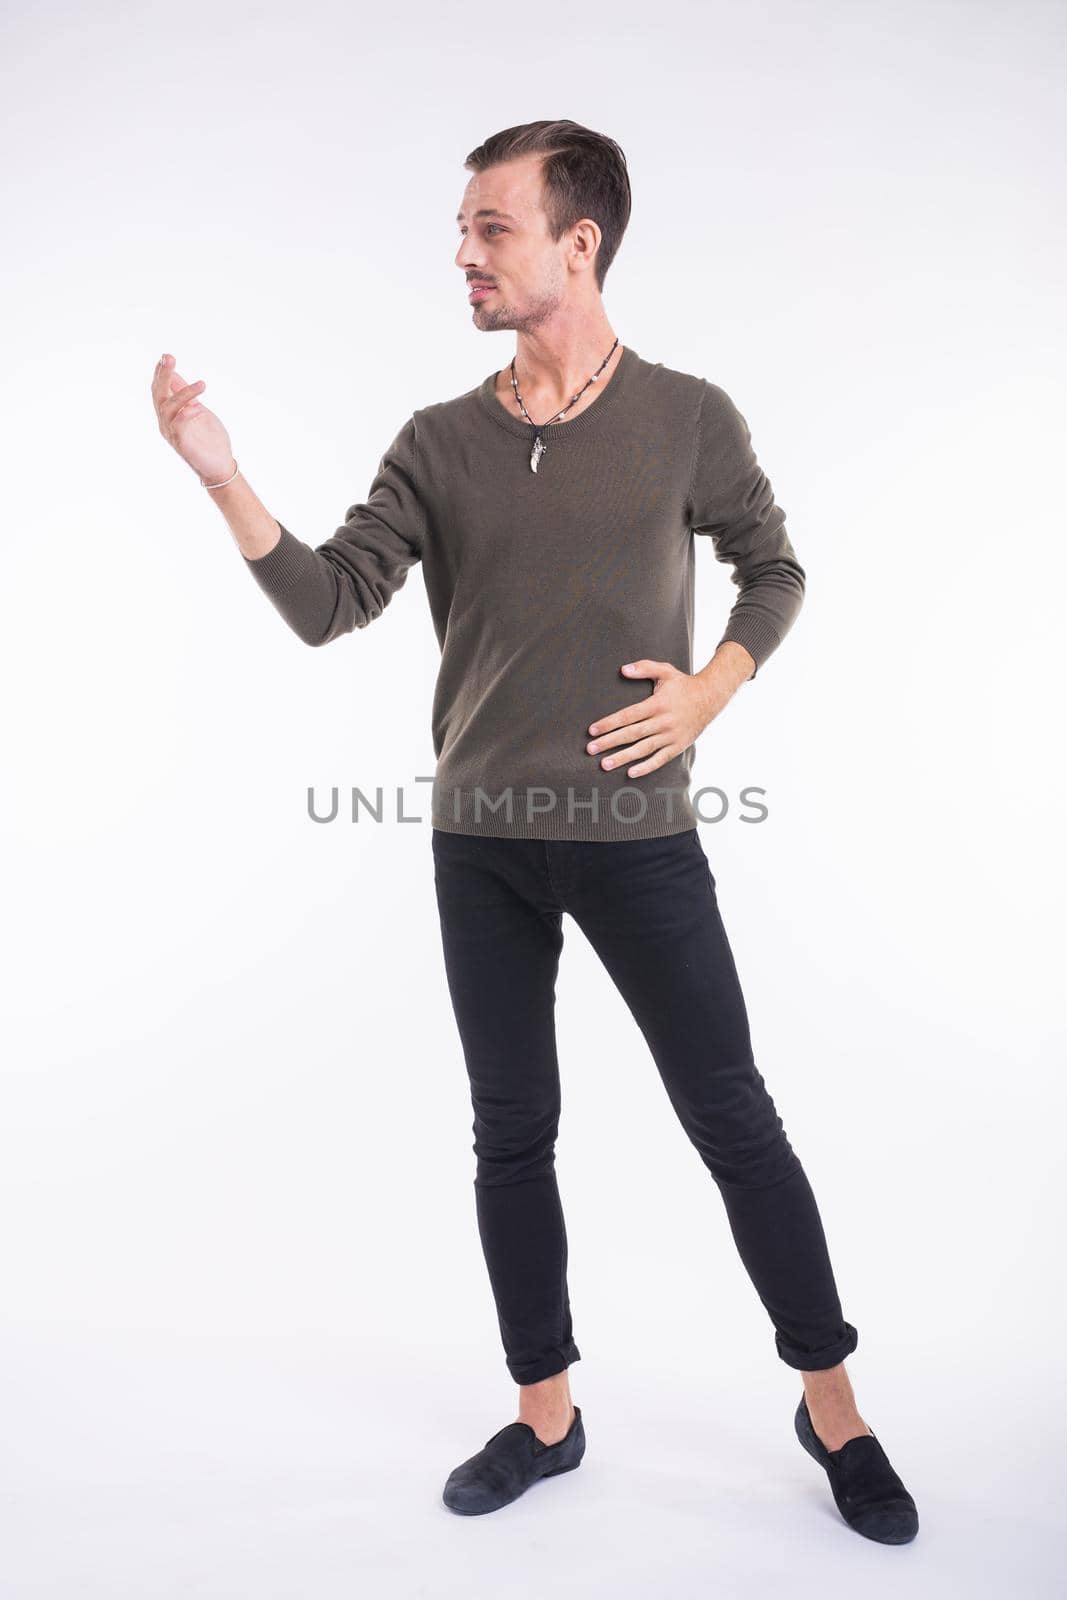 Attractive young man dancing, having fun on white background. Stylish outlook